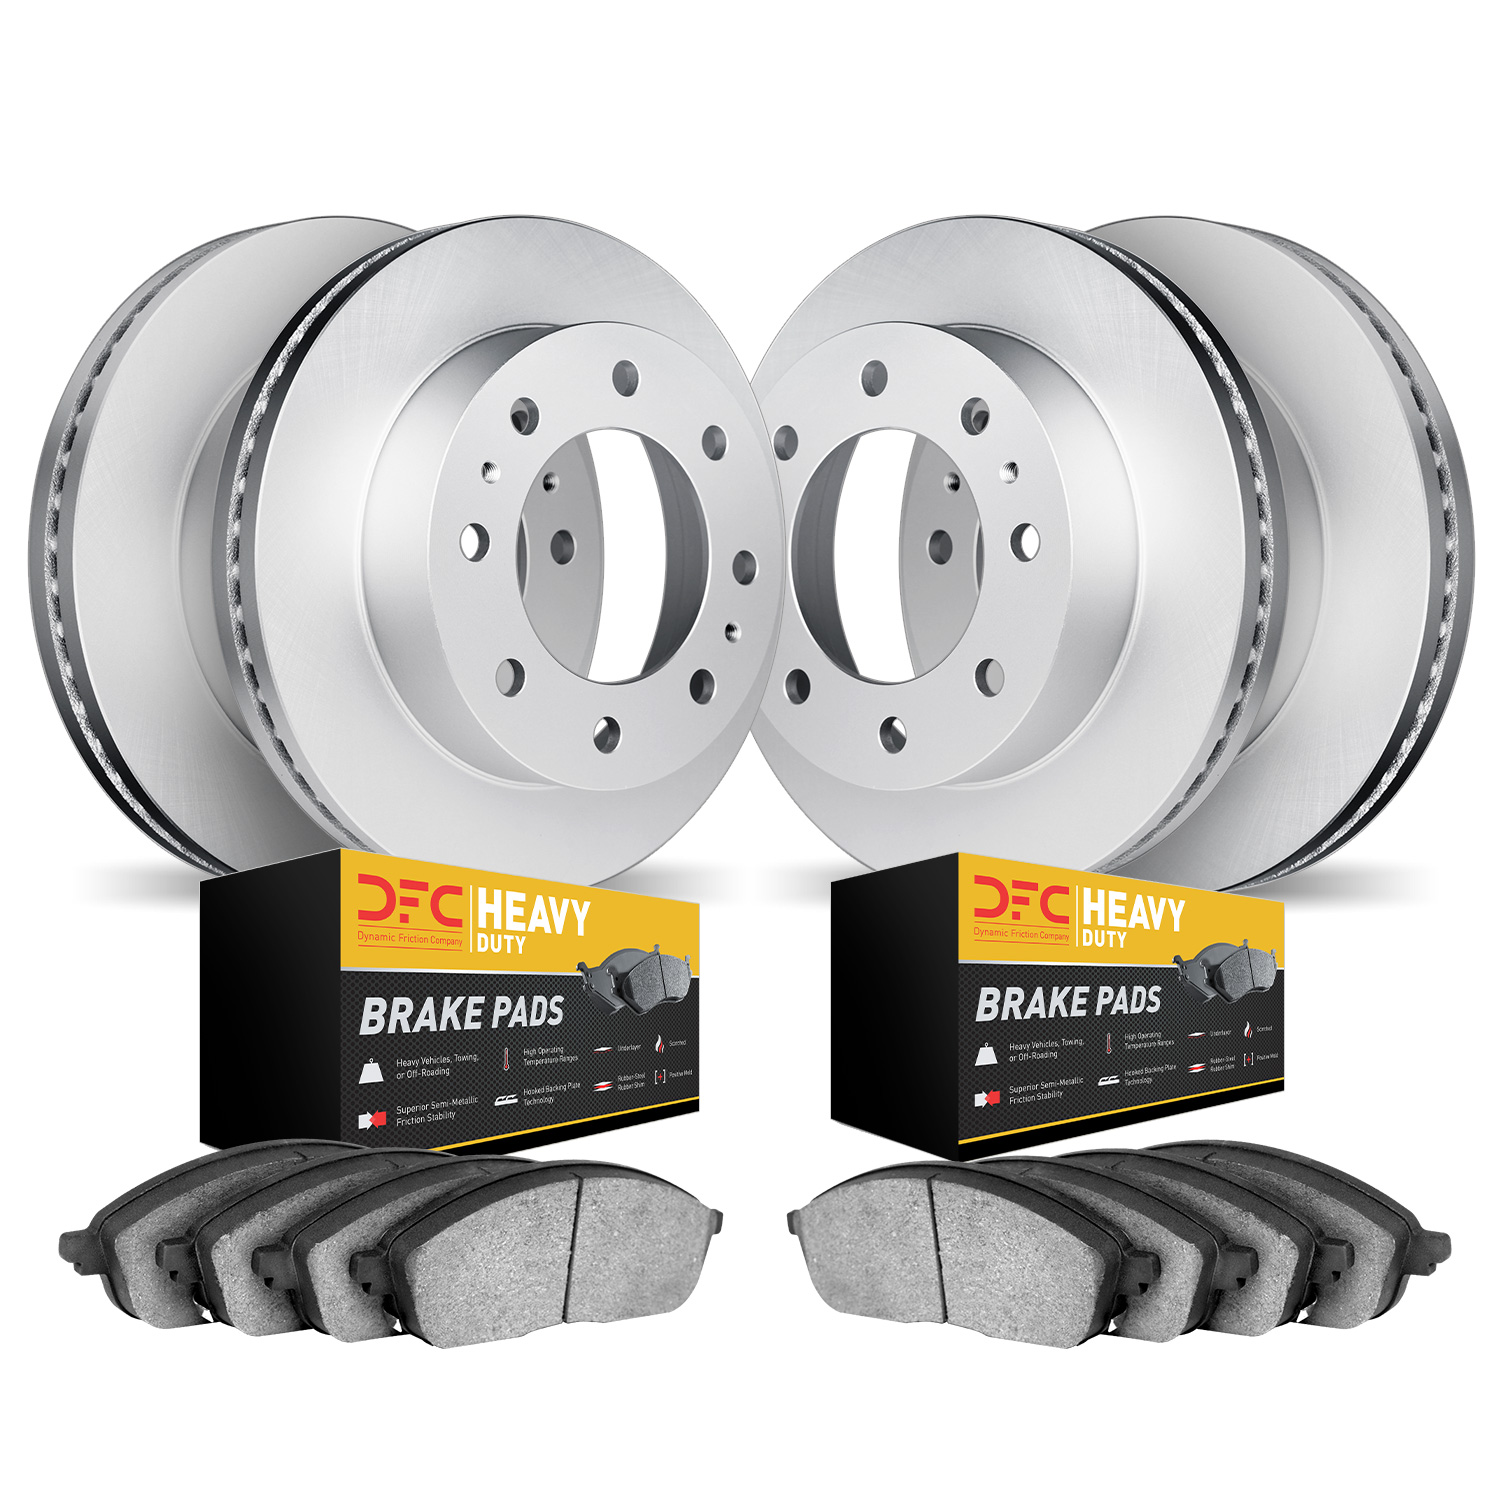 4204-54093 Geospec Brake Rotors w/Heavy-Duty Brake Pads Kit, Fits Select Ford/Lincoln/Mercury/Mazda, Position: Front and Rear